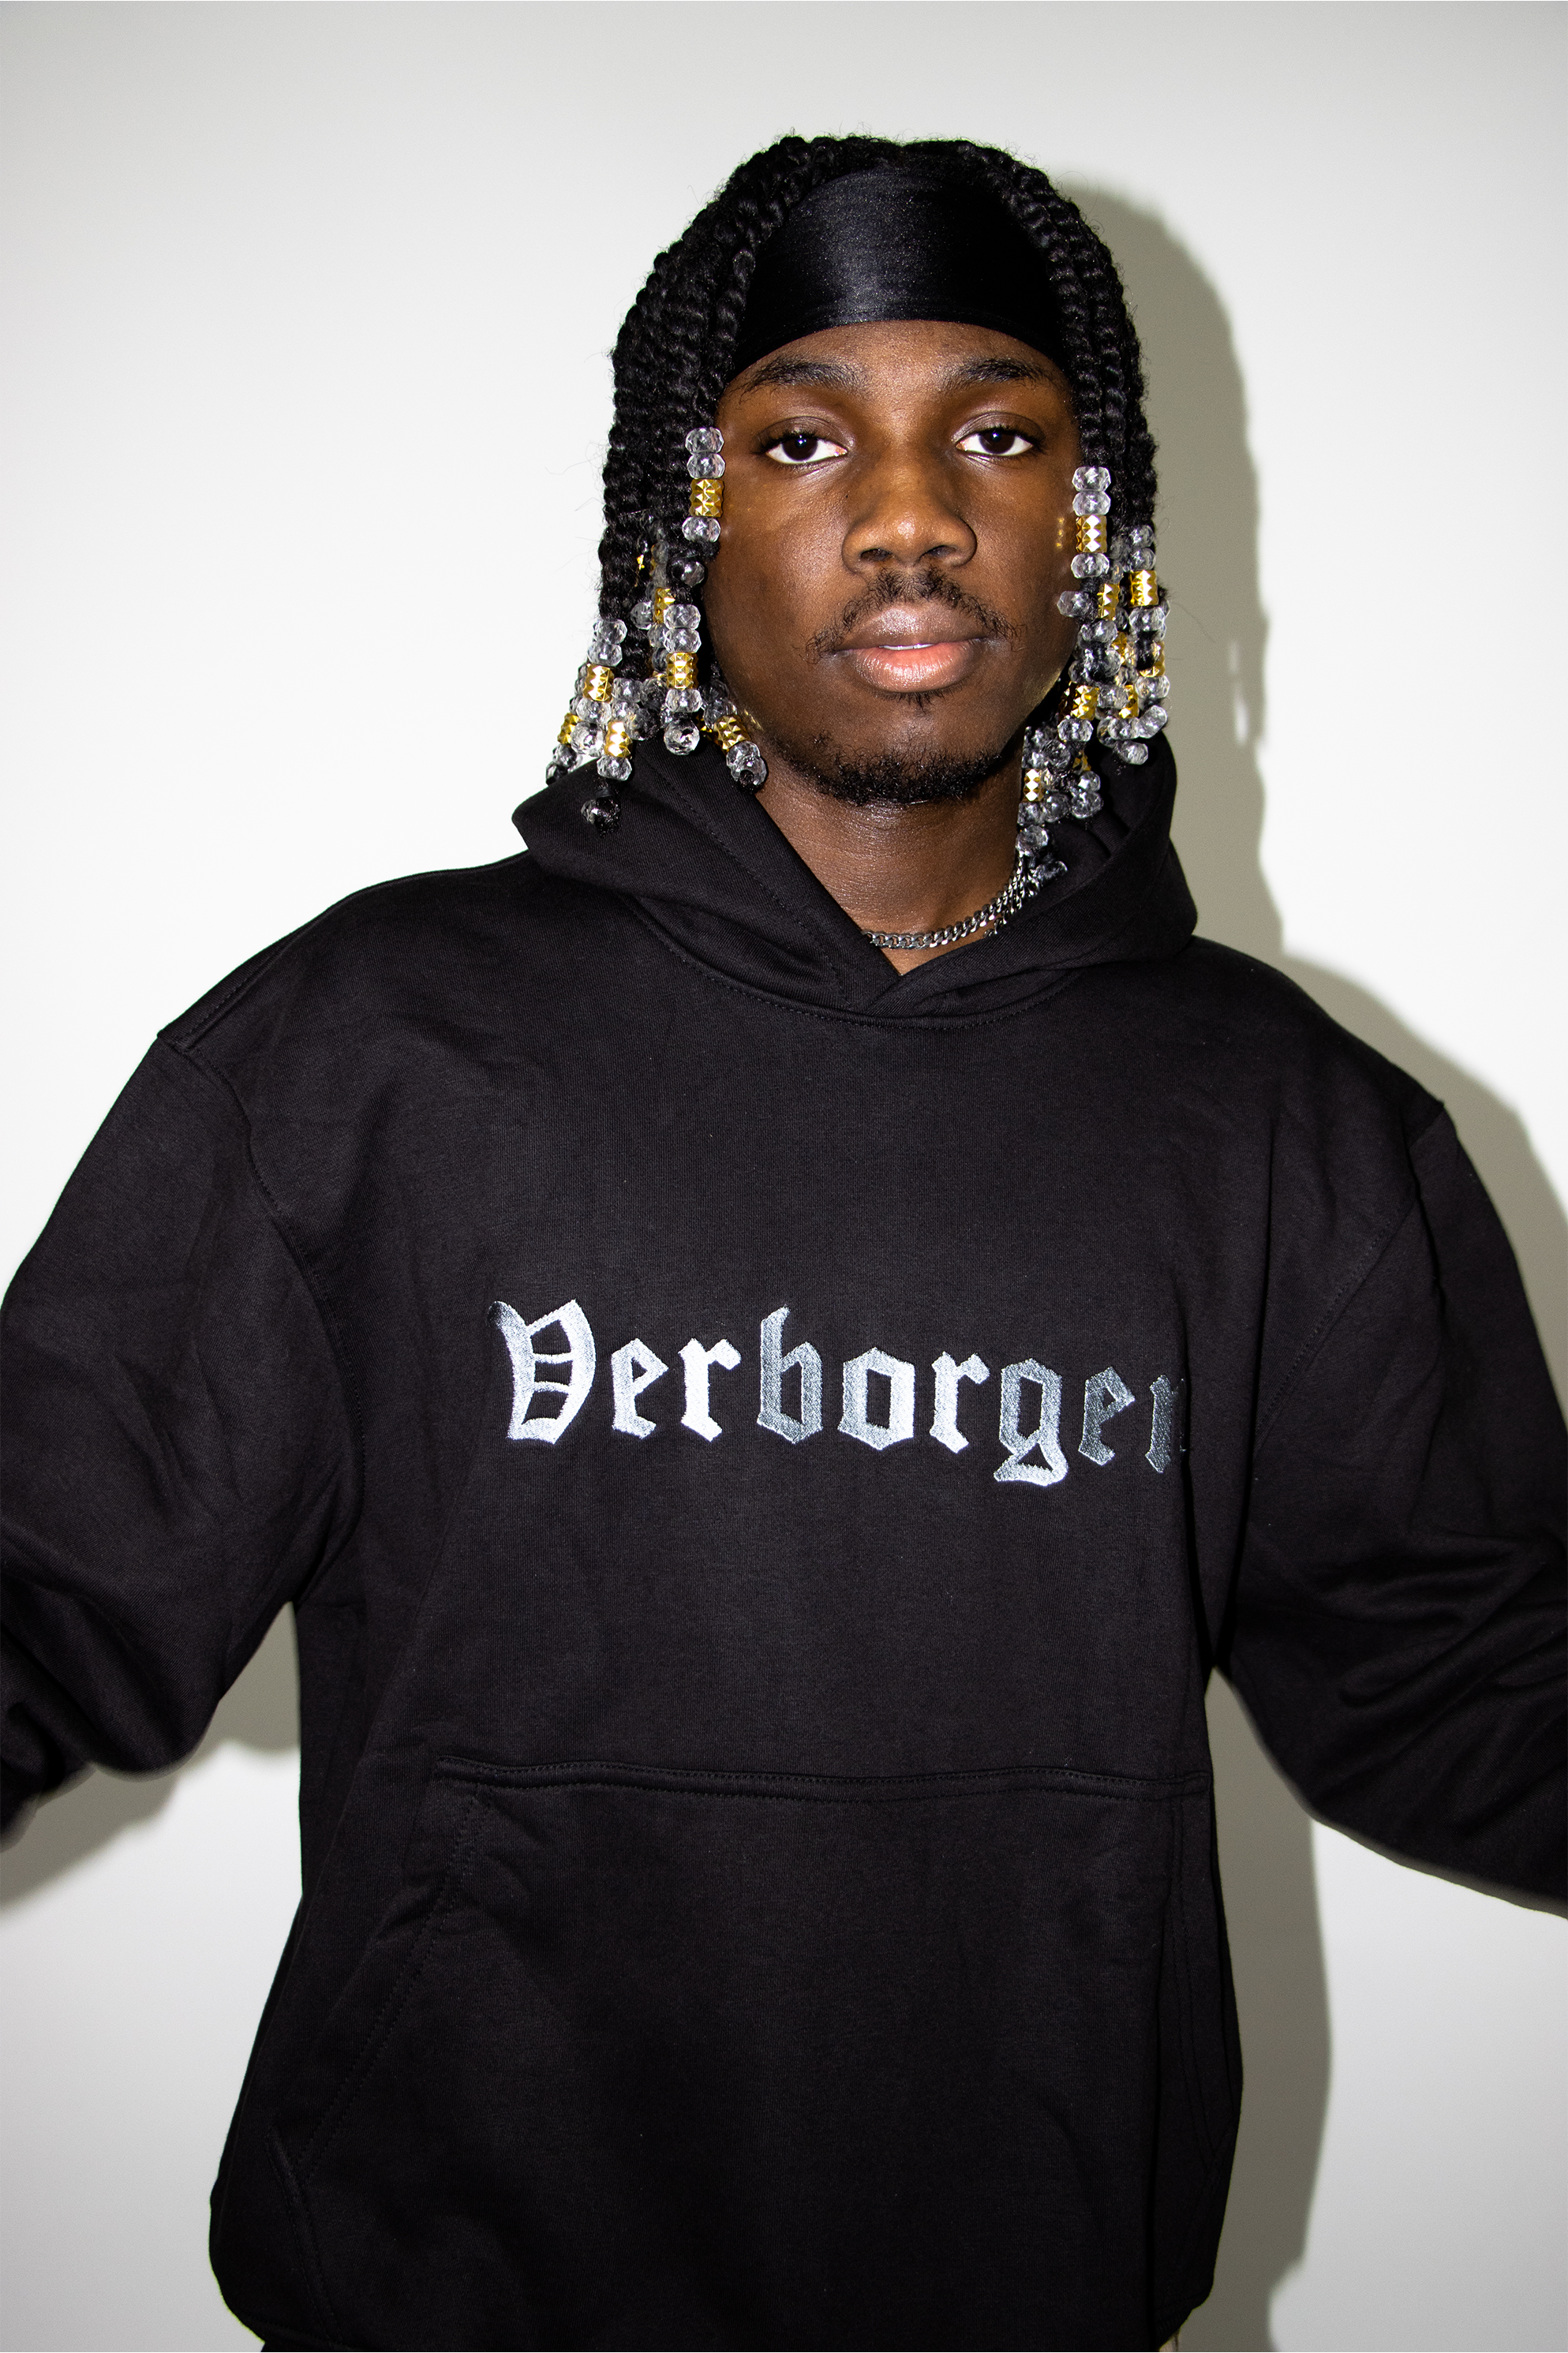 Silver Embroidery Hoodie - Black